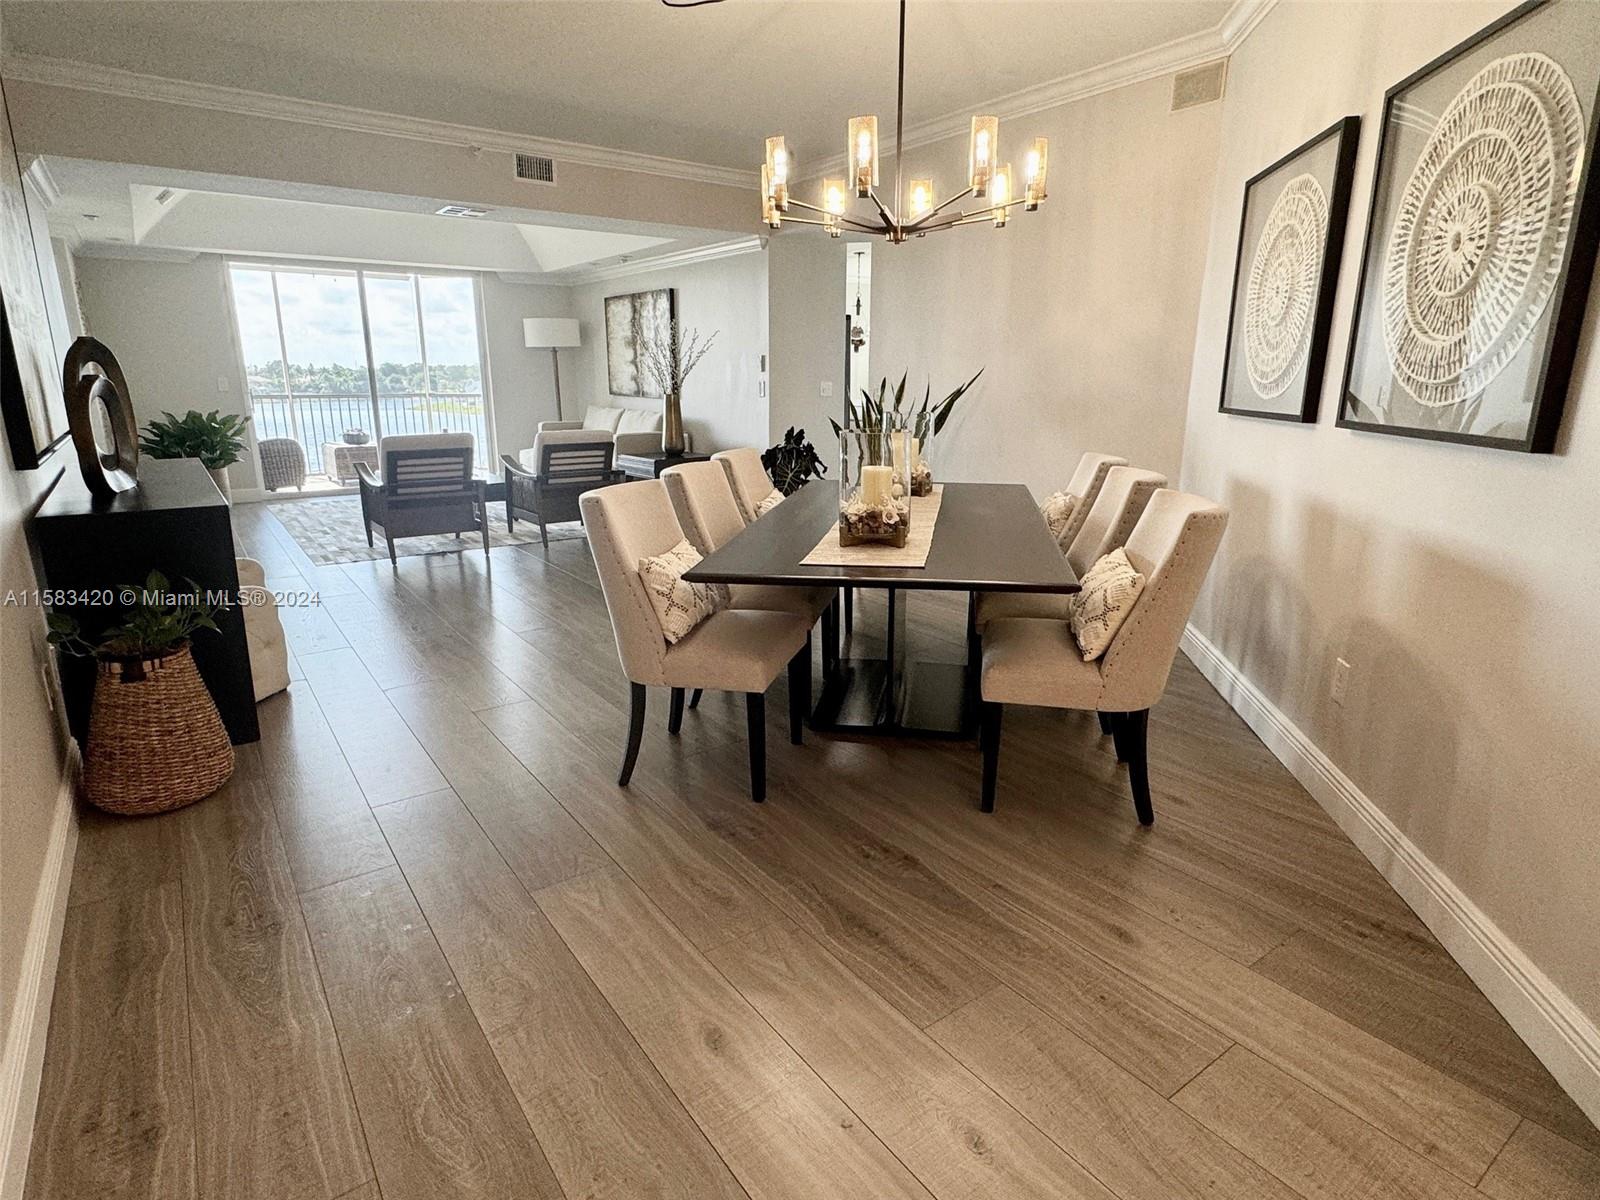 Living in a Luxury Resort Style exclusive community of Doral Isles. Spectacular Lake View condo with a great layout of 2,490 sqft  featuring over $150K in upgrades, 3 bedrooms, 2 baths, remodeled kitchen in 2022, brand new AC, fully replaced in 2023, new flooring throughout the entire unit, walking closets with tempered glass doors, motorized shade in the balcony, new washer and dryer, UV filters in all windows. See attachment for all the details. Beautiful Club House with all amenities including a new restaurant, fitness center, 3 pools, sauna, tennis courts, basketball court, soccer field, private beach with volleyball court, children playground, jogging trail....Just fall in Love!!